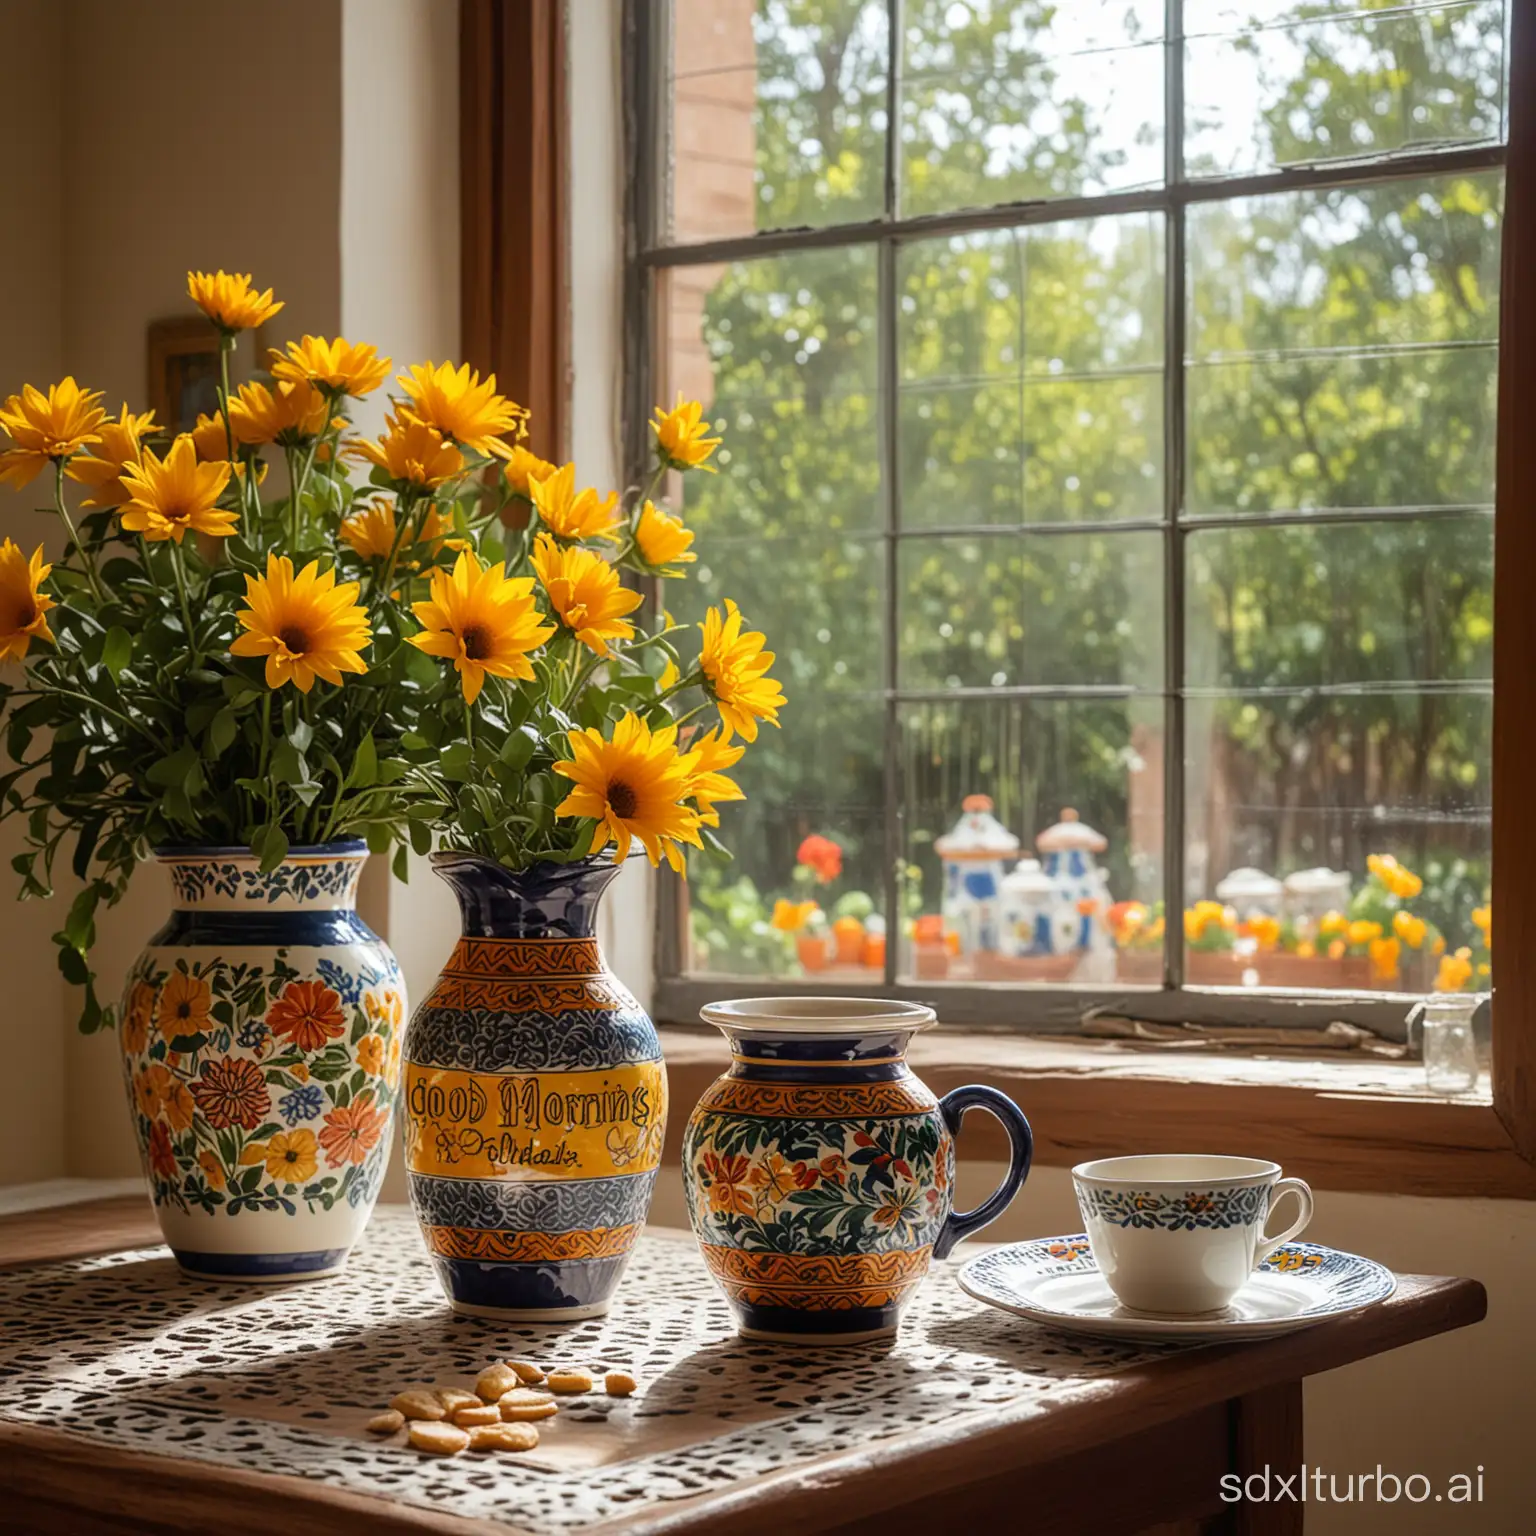 Mexican-Talavera-Vase-on-Sunlit-Table-with-Morning-Coffee